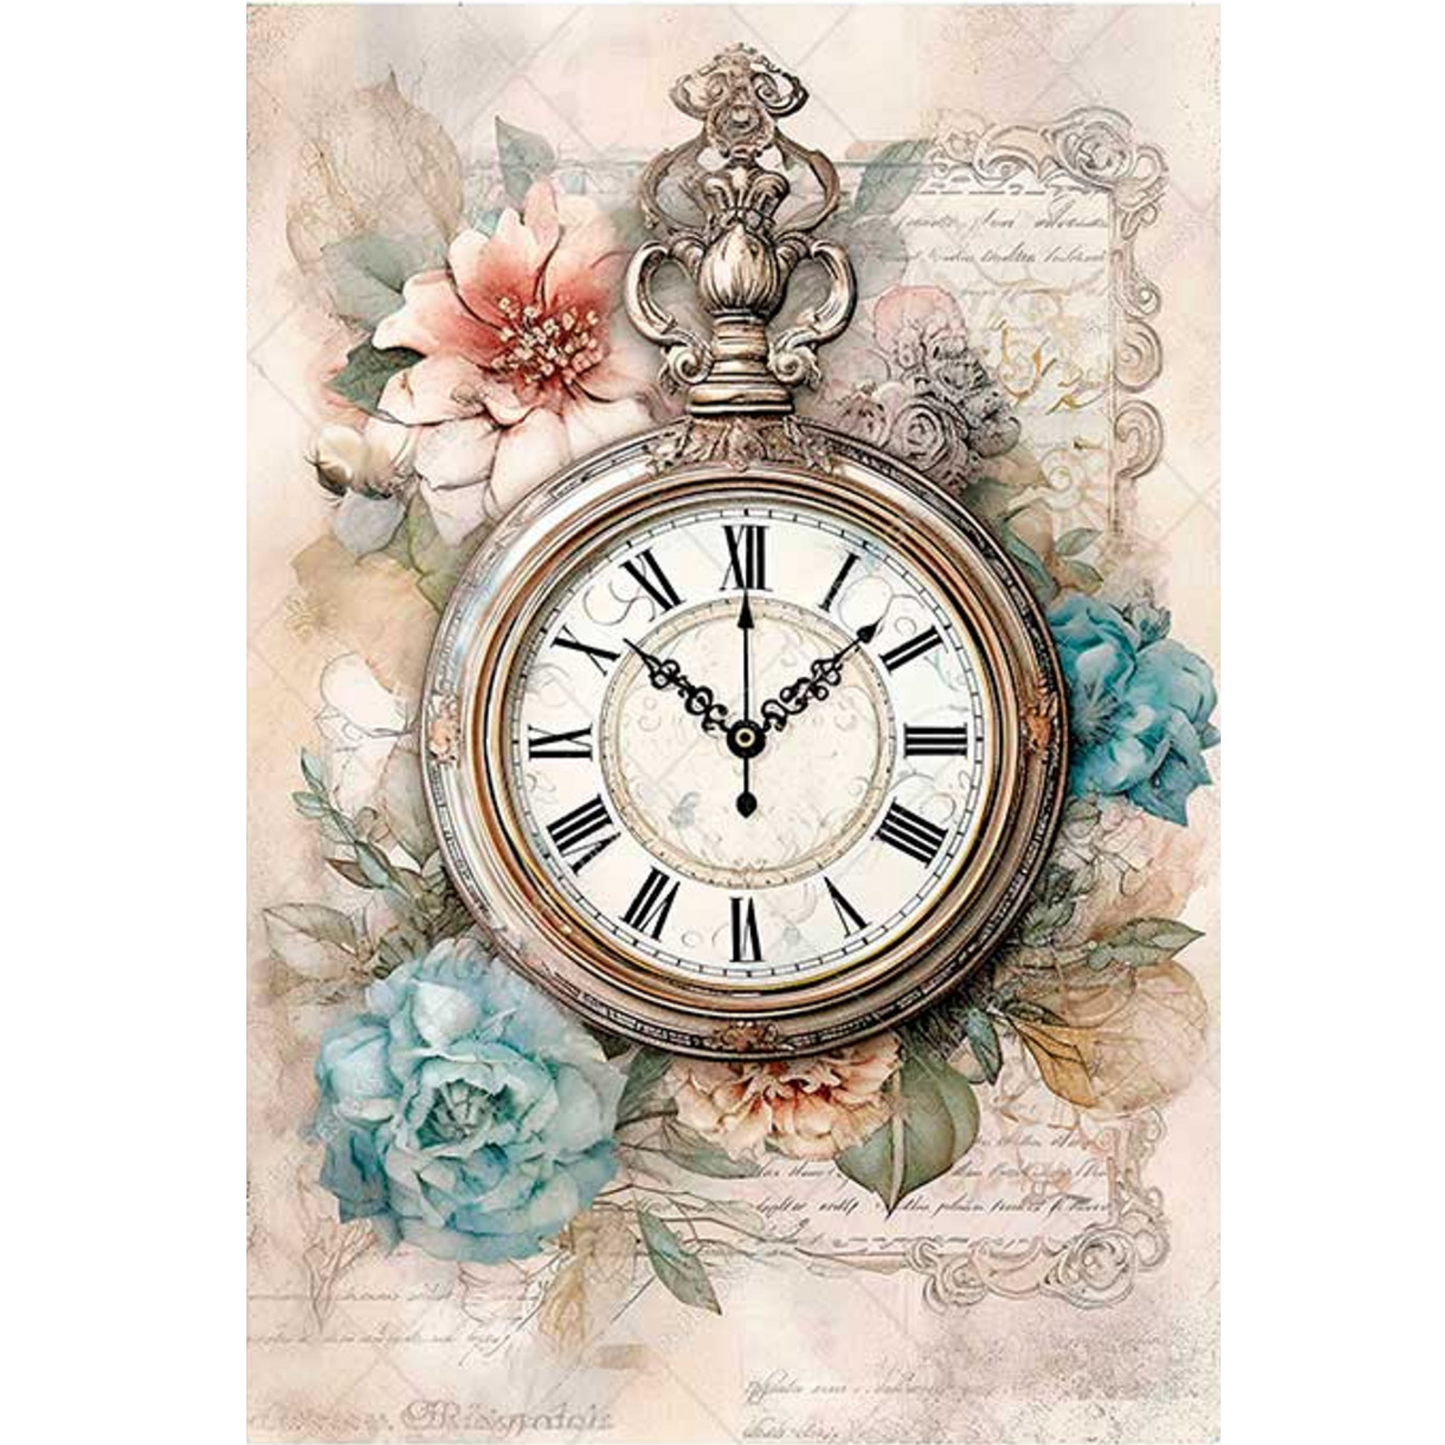 "Floral Timepiece" decoupage rice paper by Paper Designs. Available at Milton's Daughter.